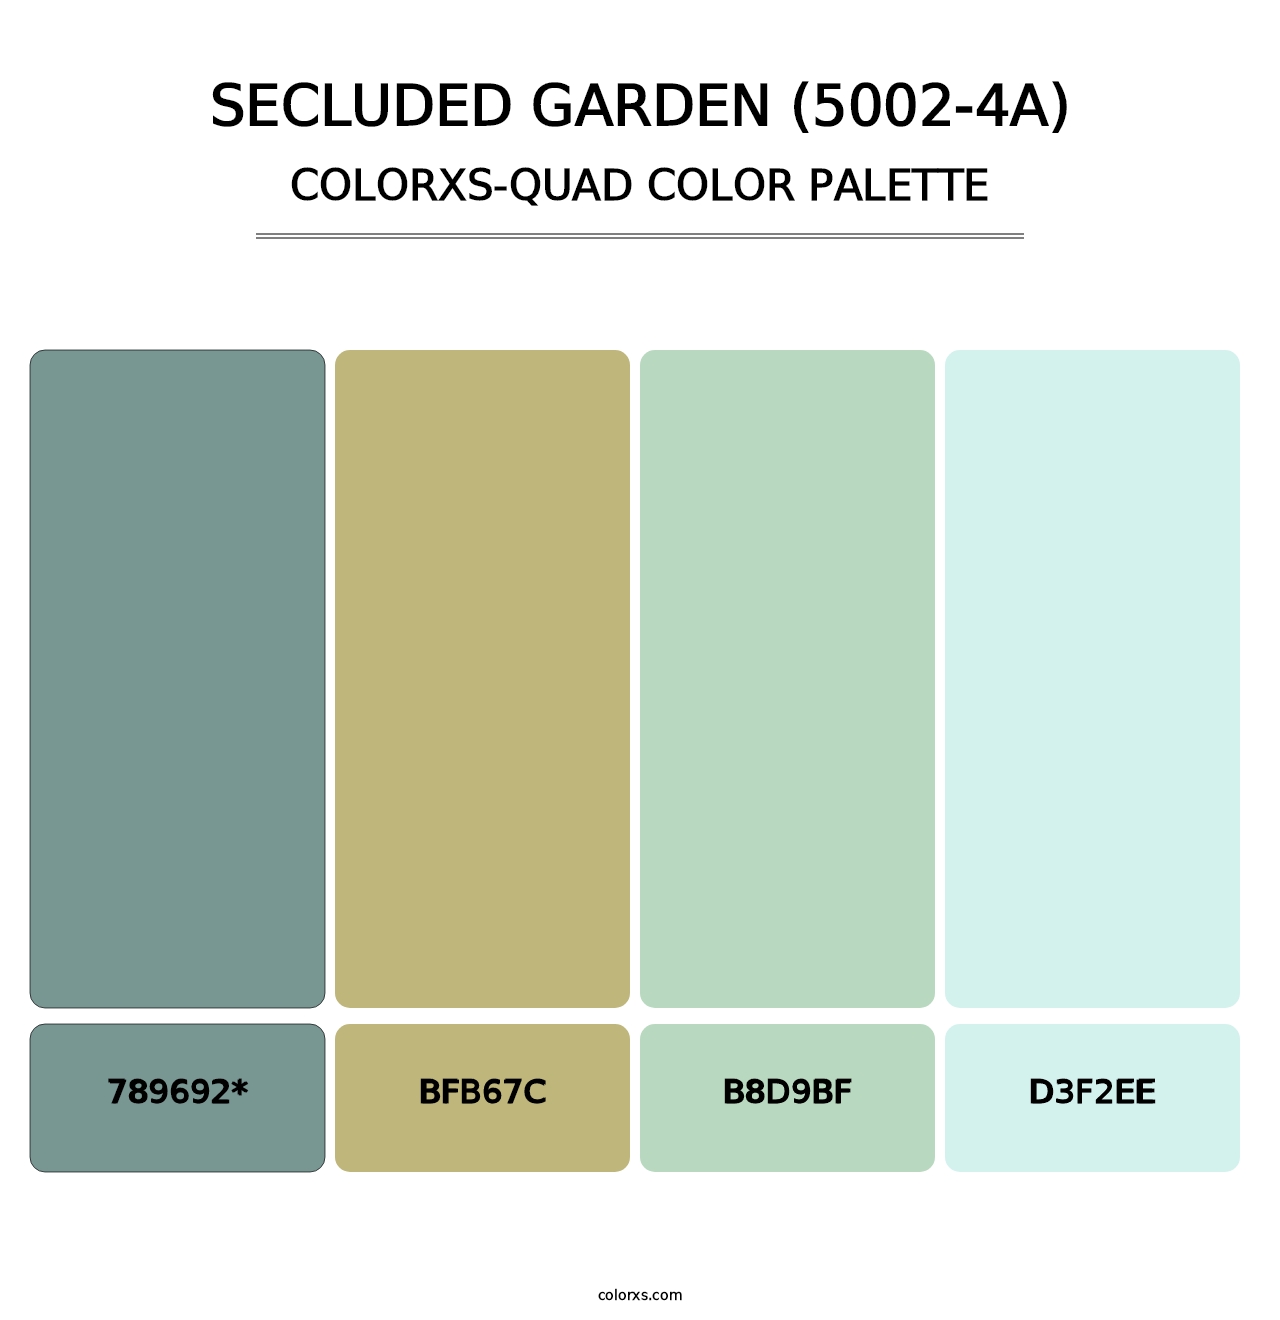 Secluded Garden (5002-4A) - Colorxs Quad Palette